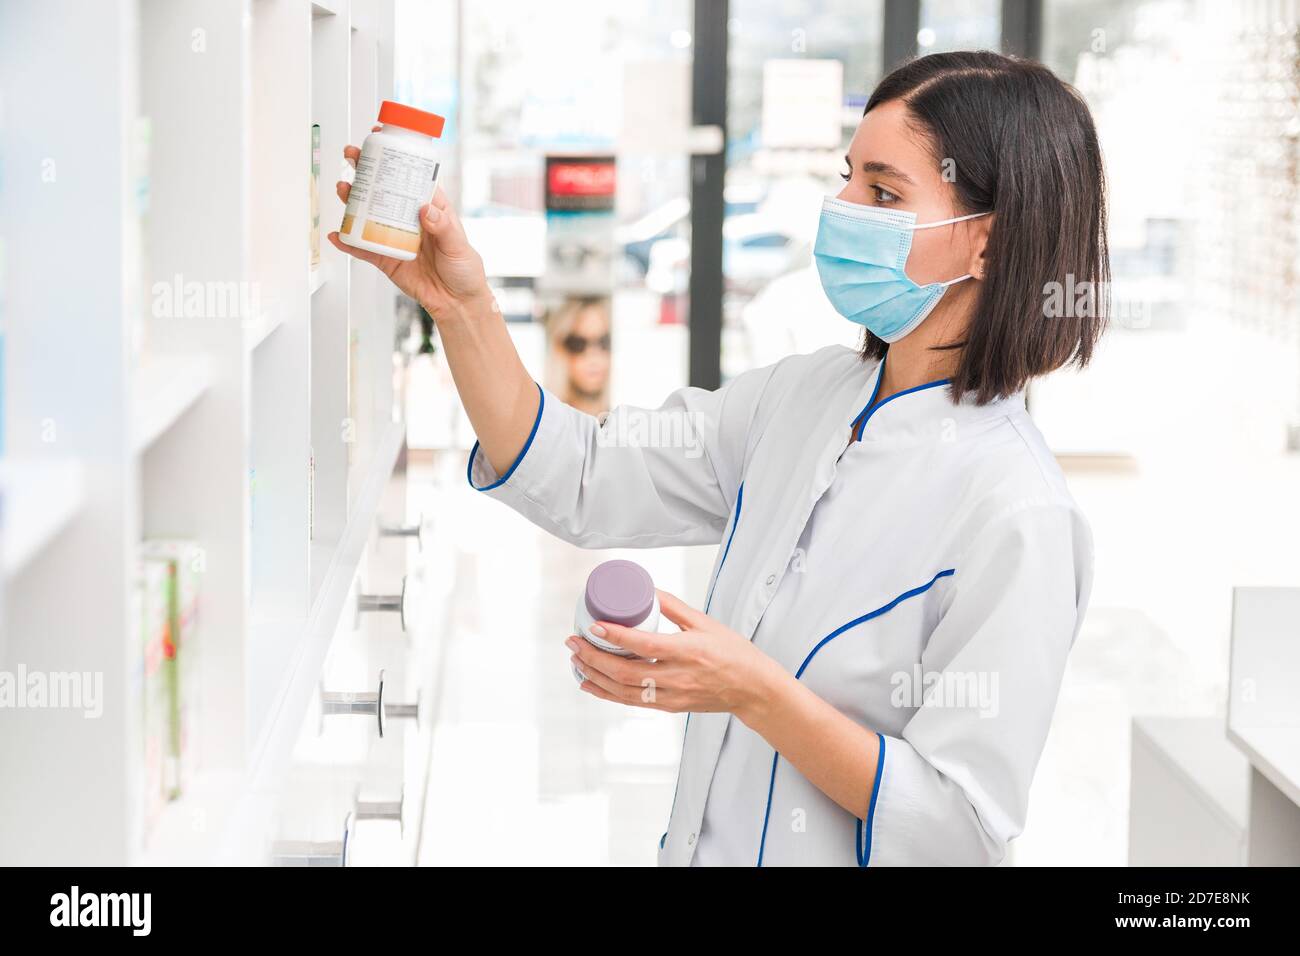 choosing the right medicine. professional looking female pharmacist with medical mask on in drug store studying the prospectus of a new drug Stock Photo